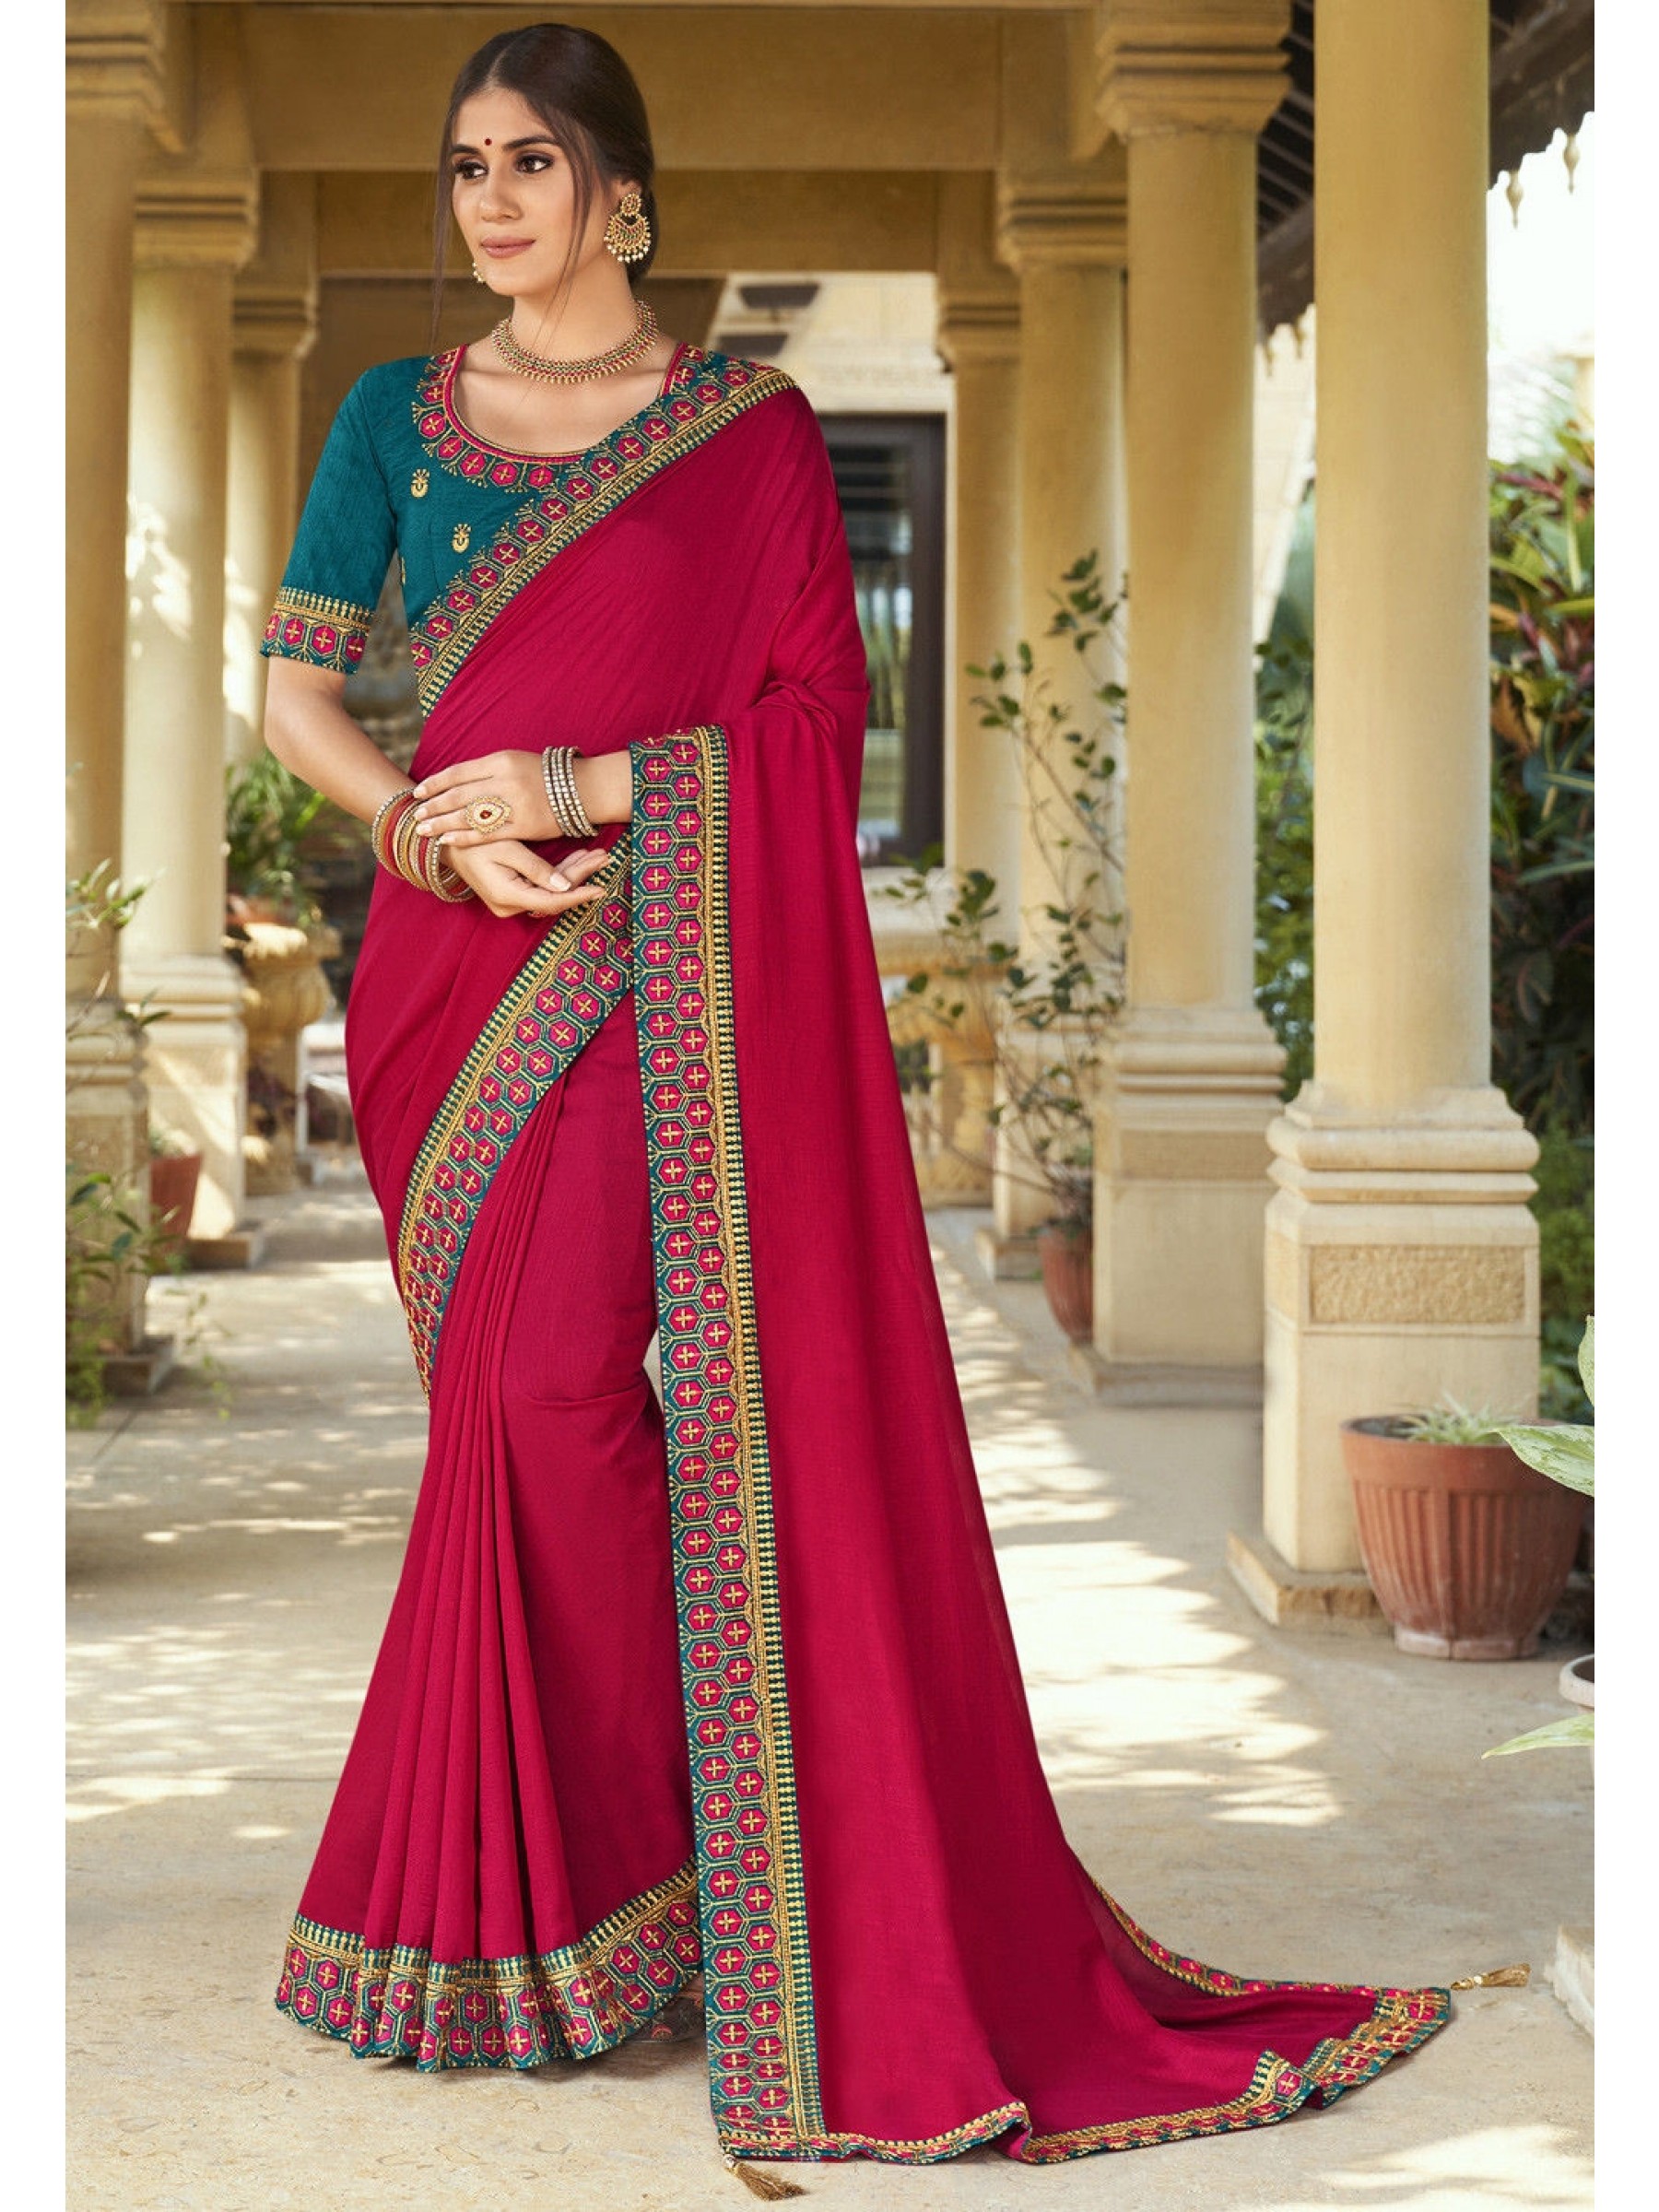 Silk Fabric Party Wear Saree In Rani Color With Embroidery Work